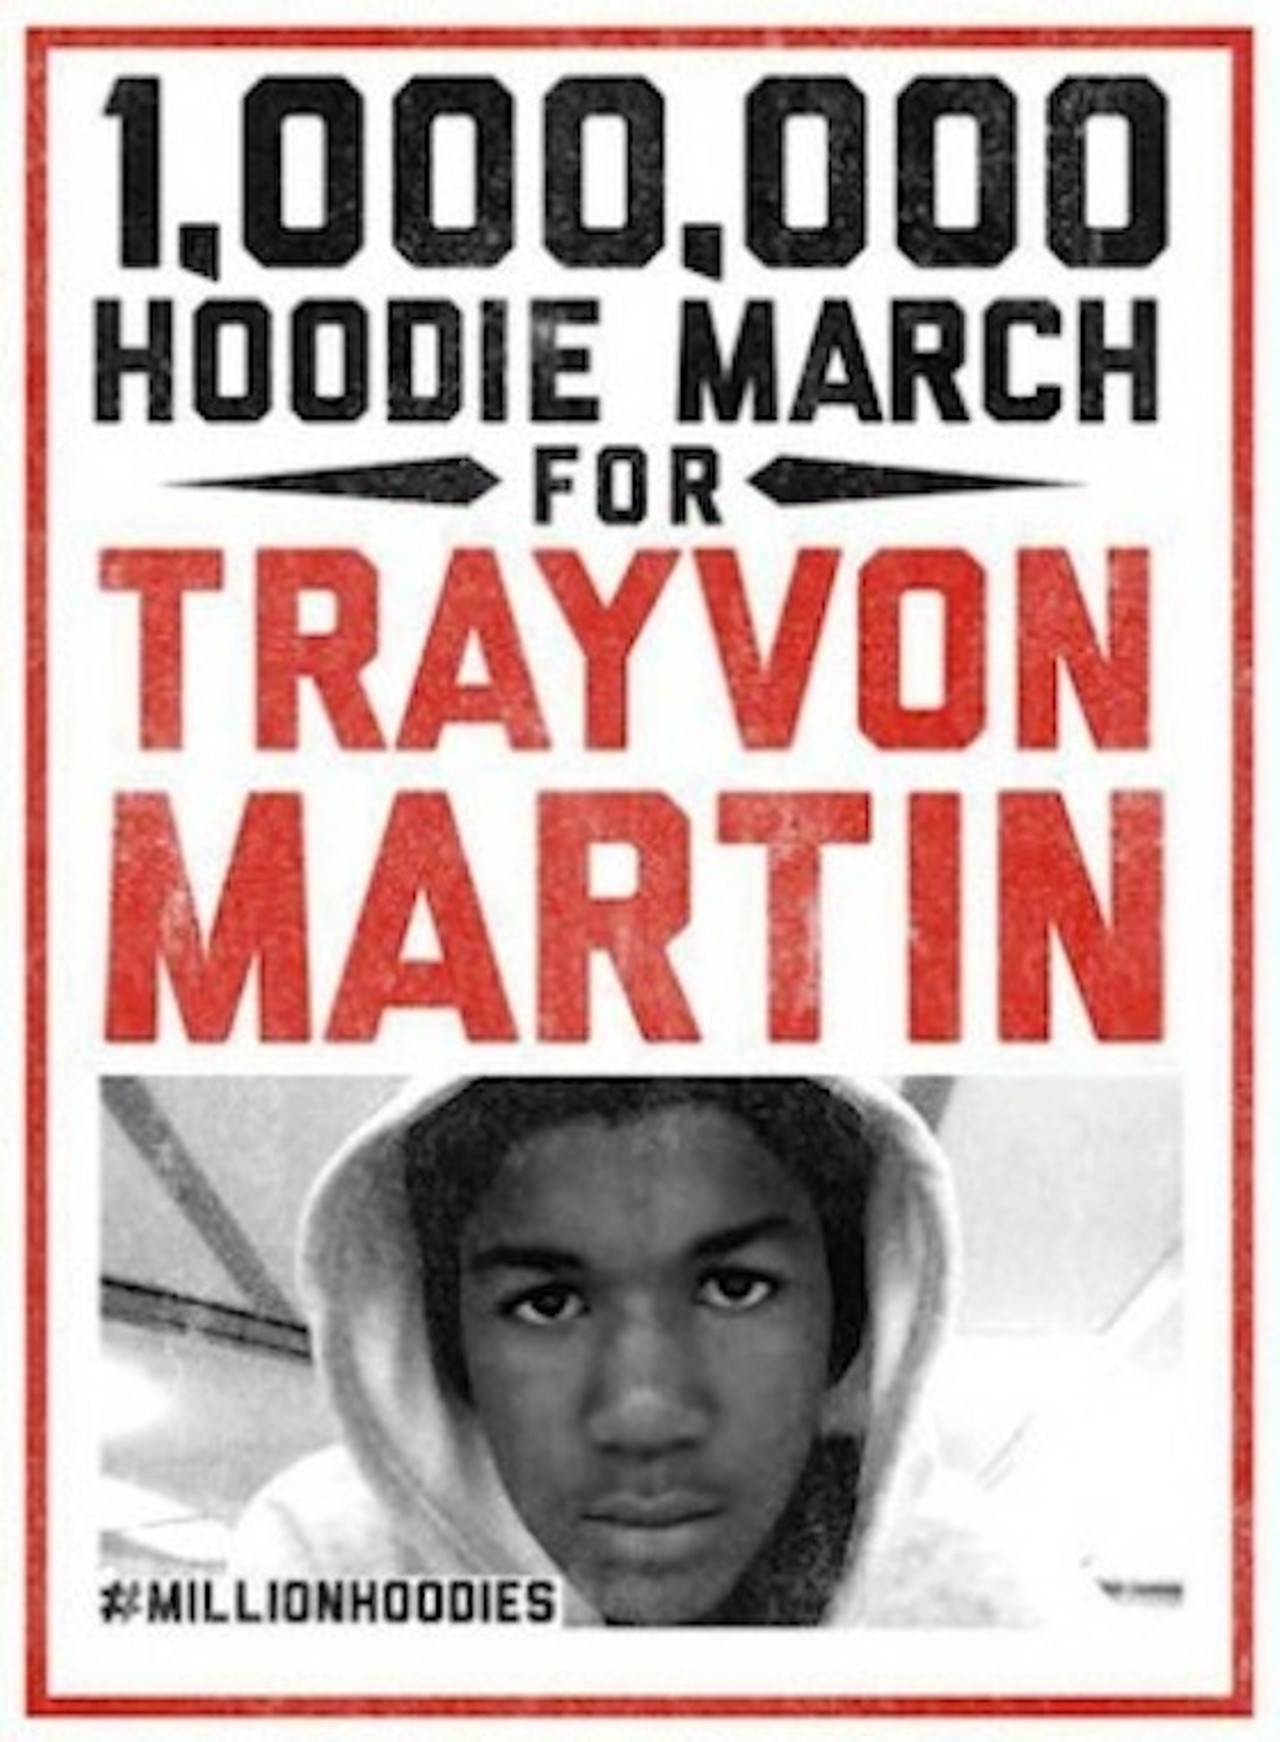 On March 26, the Million Hoodie March went through Los Angeles.